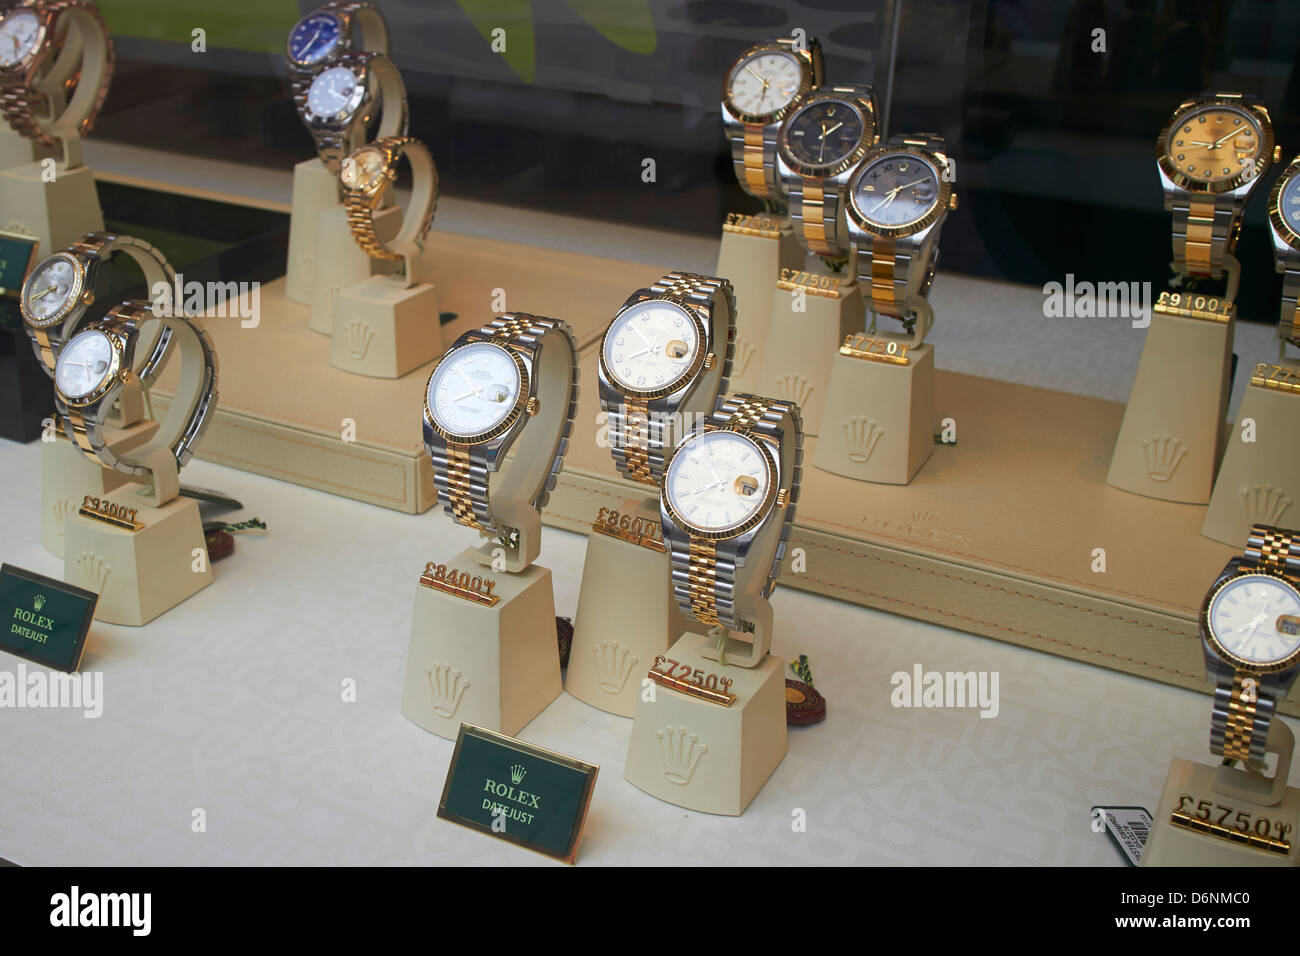 Rolex watches on display in shop window Stock Photo - Alamy